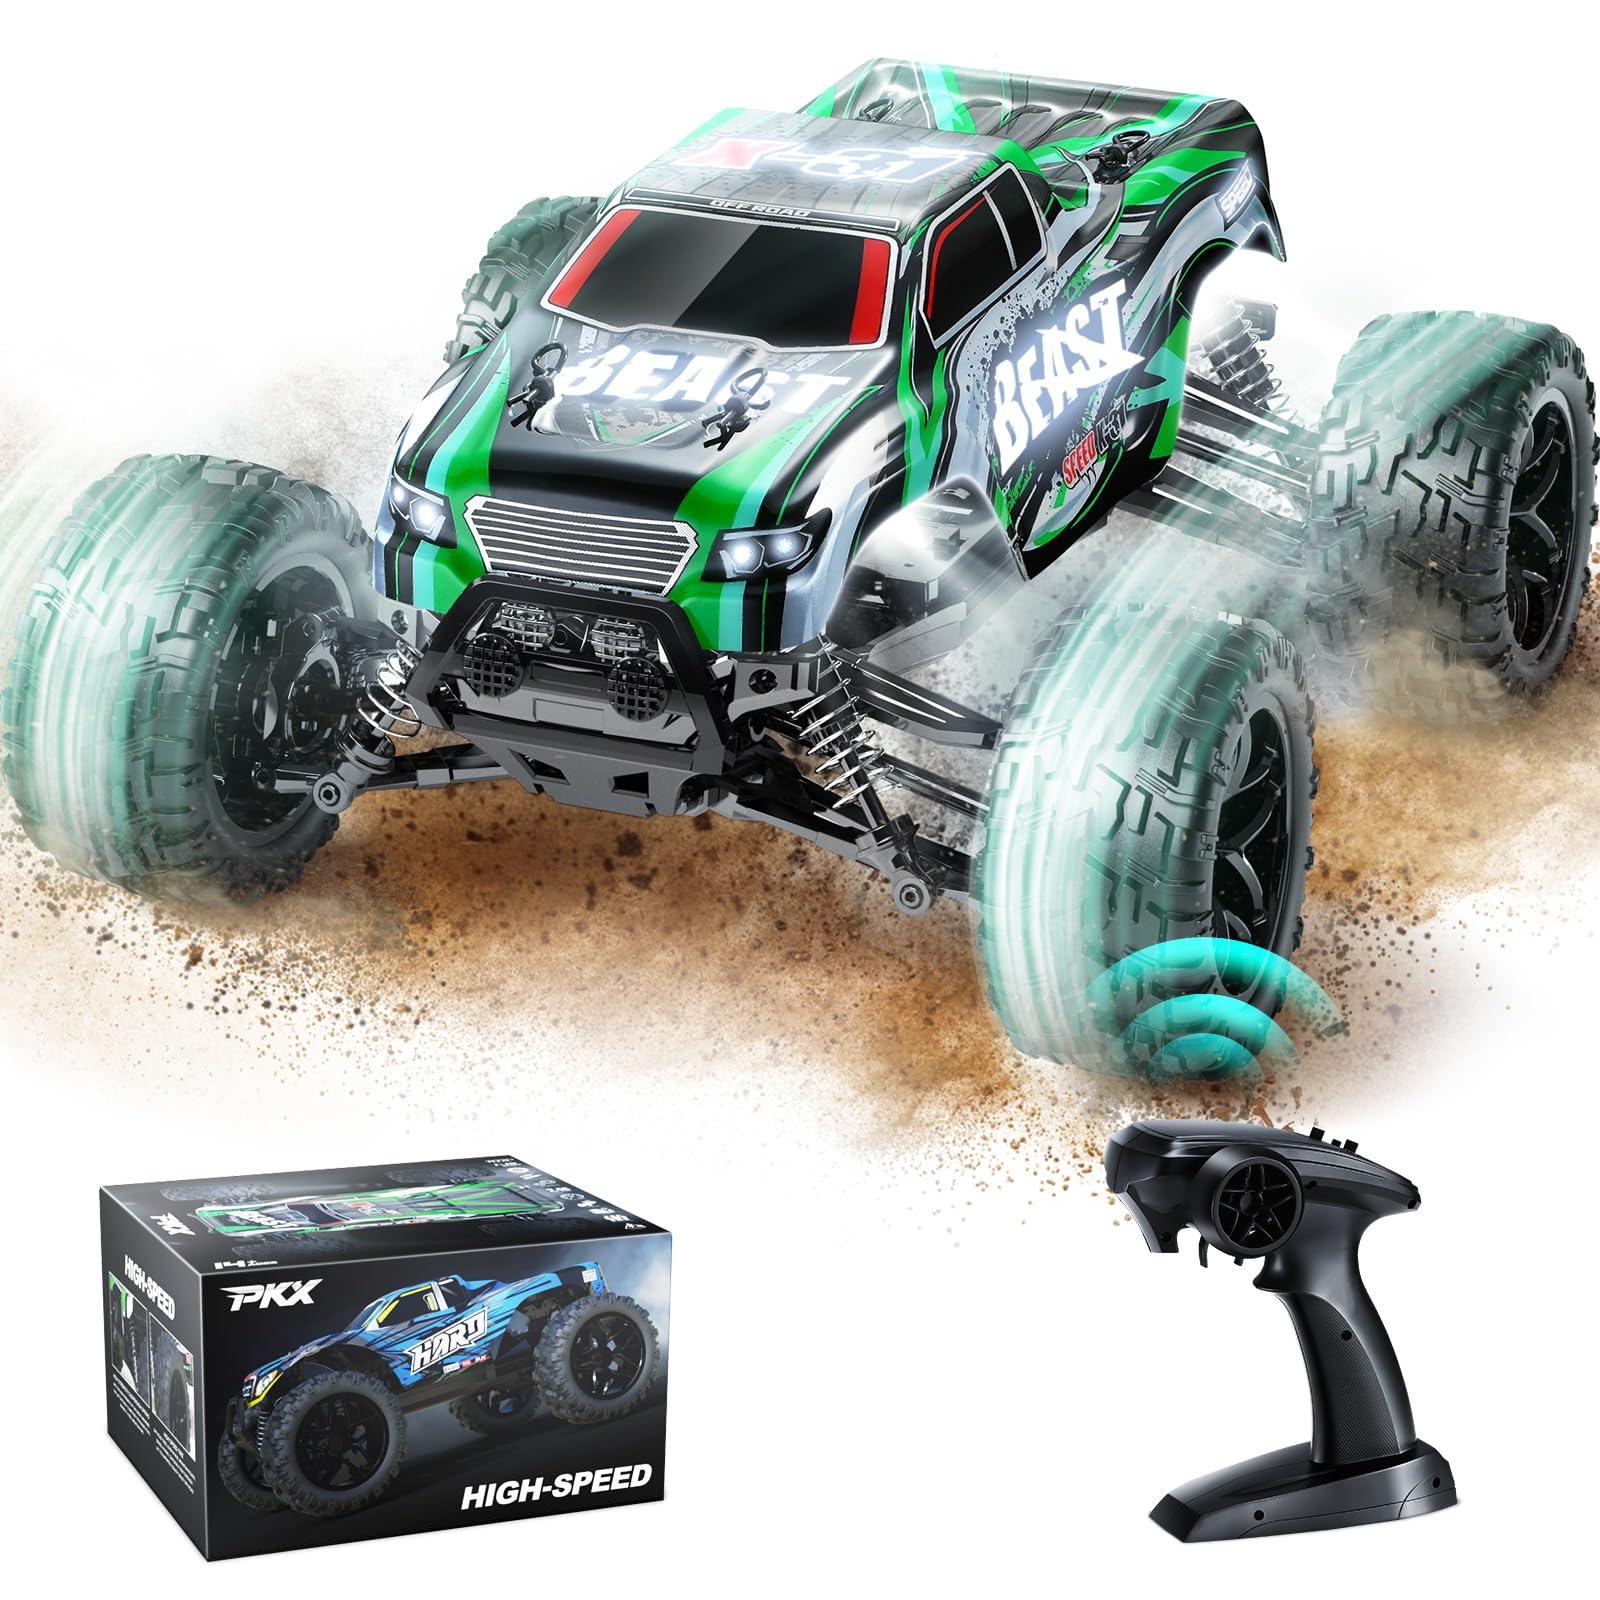 Rc Cars For Sale: Where to Buy: A Guide to Purchasing Quality RC Cars